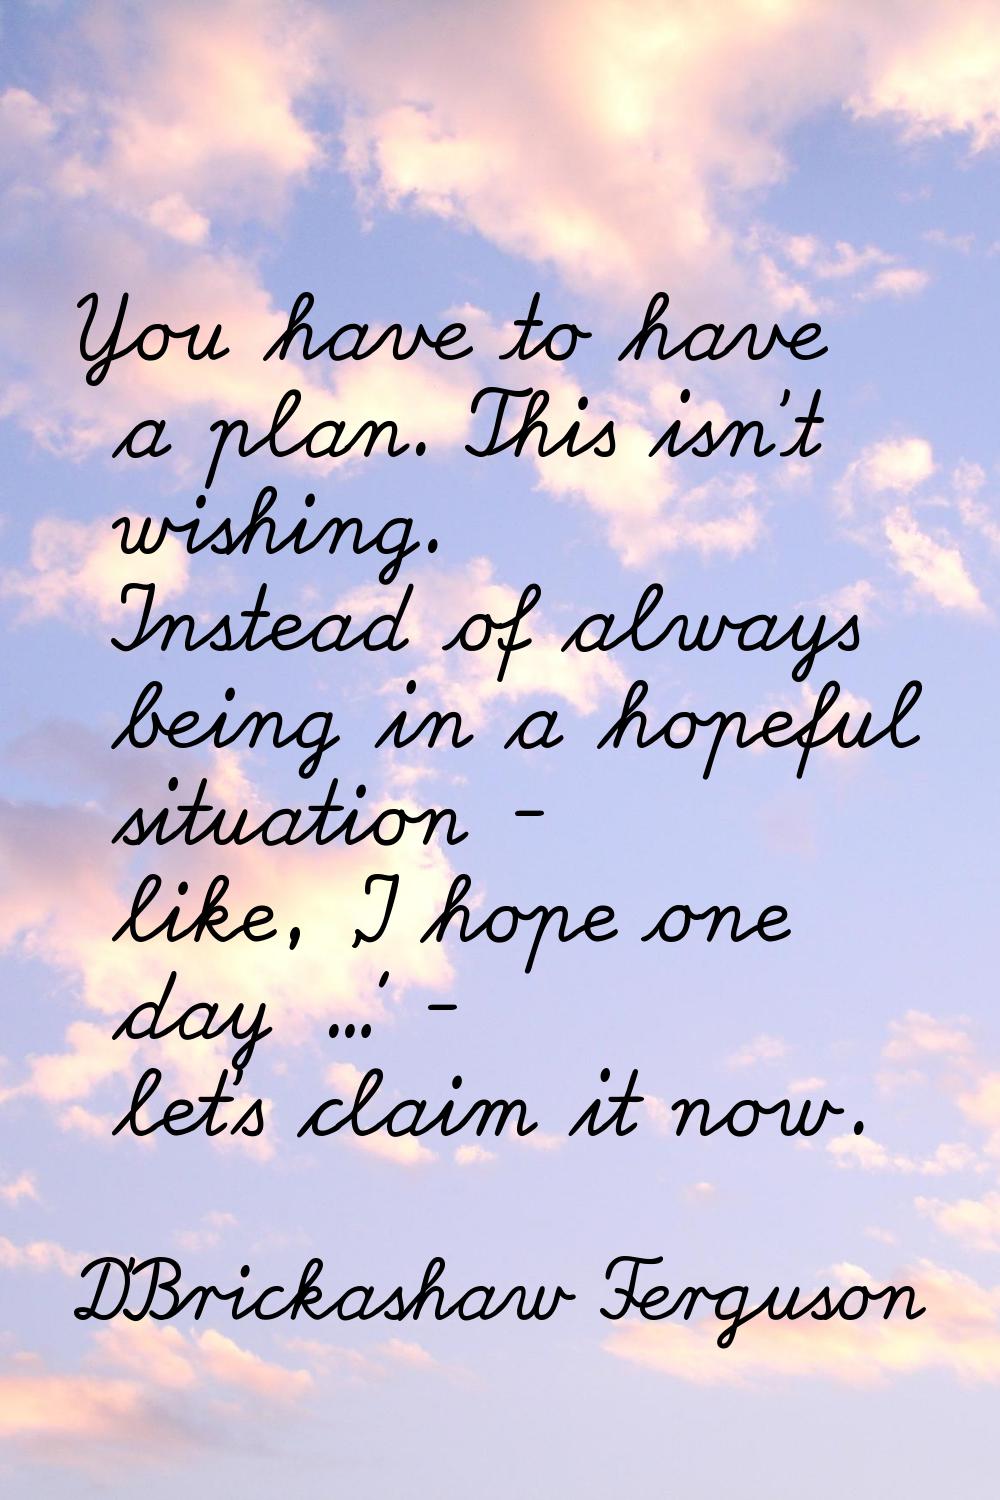 You have to have a plan. This isn't wishing. Instead of always being in a hopeful situation - like,